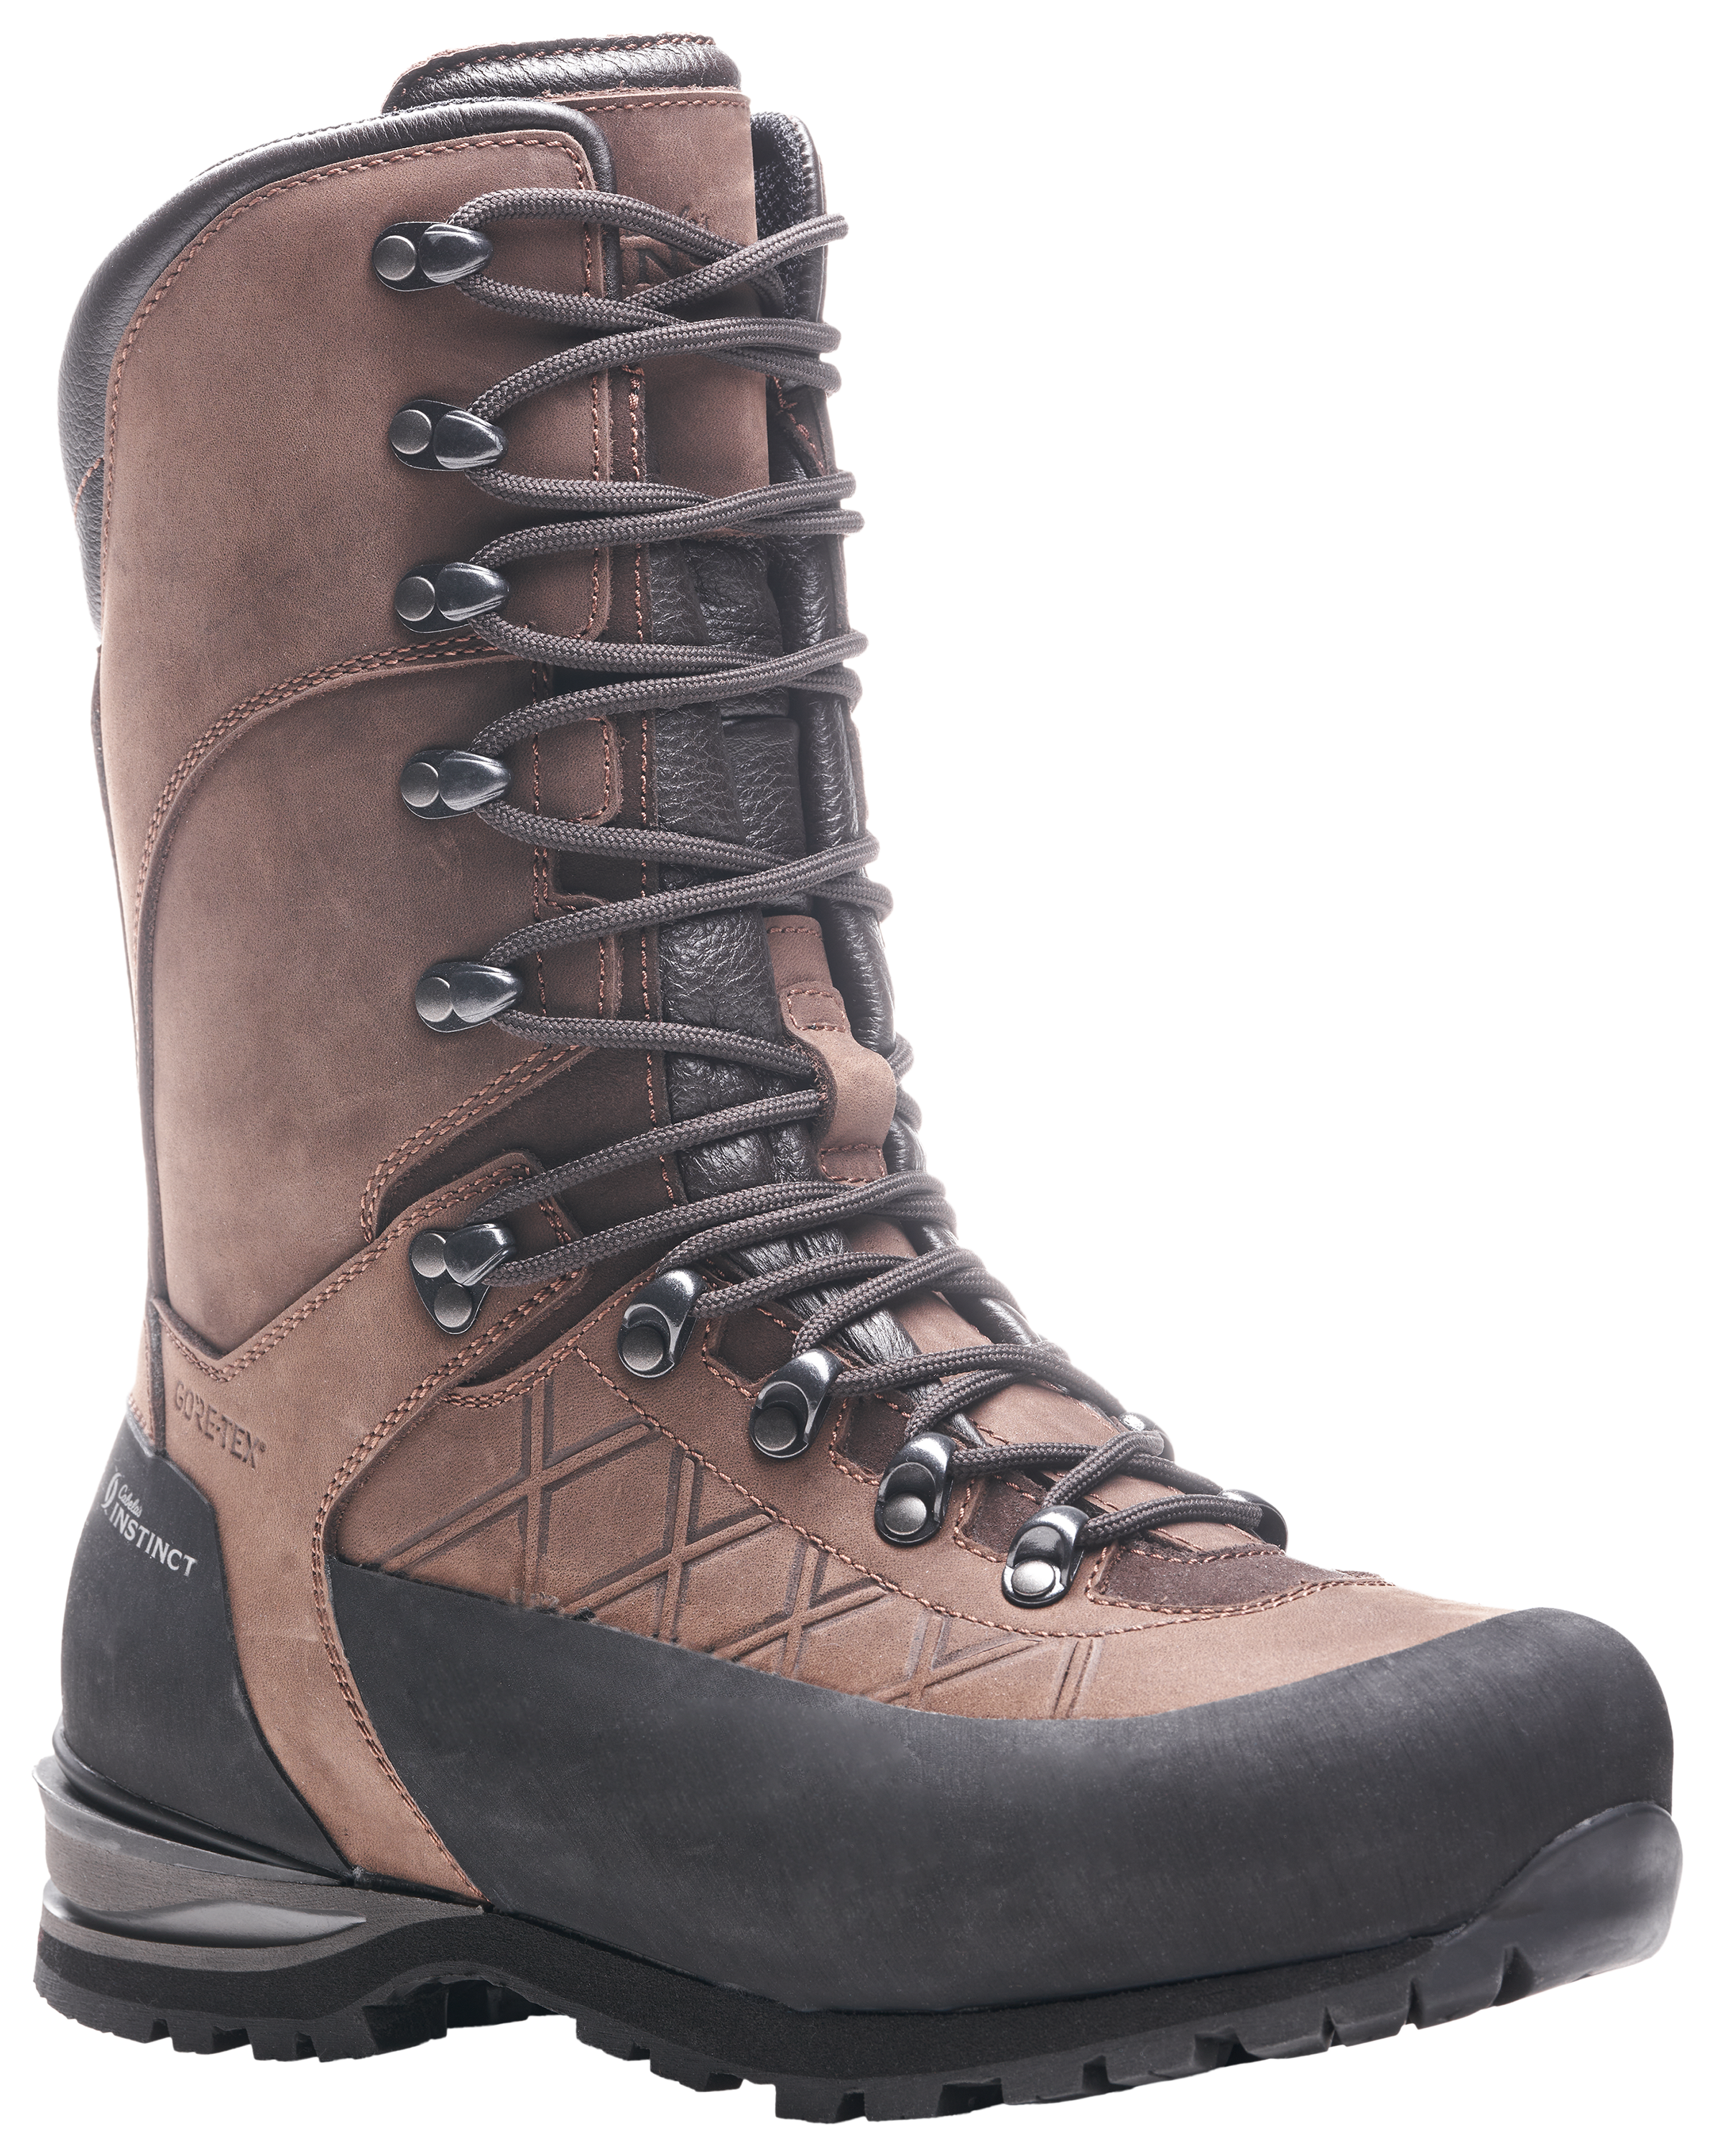 Cabela's Instinct Mountain Thermal 600 GORE-TEX Insulated Hunting Boots for Men - Brown - 10.5W